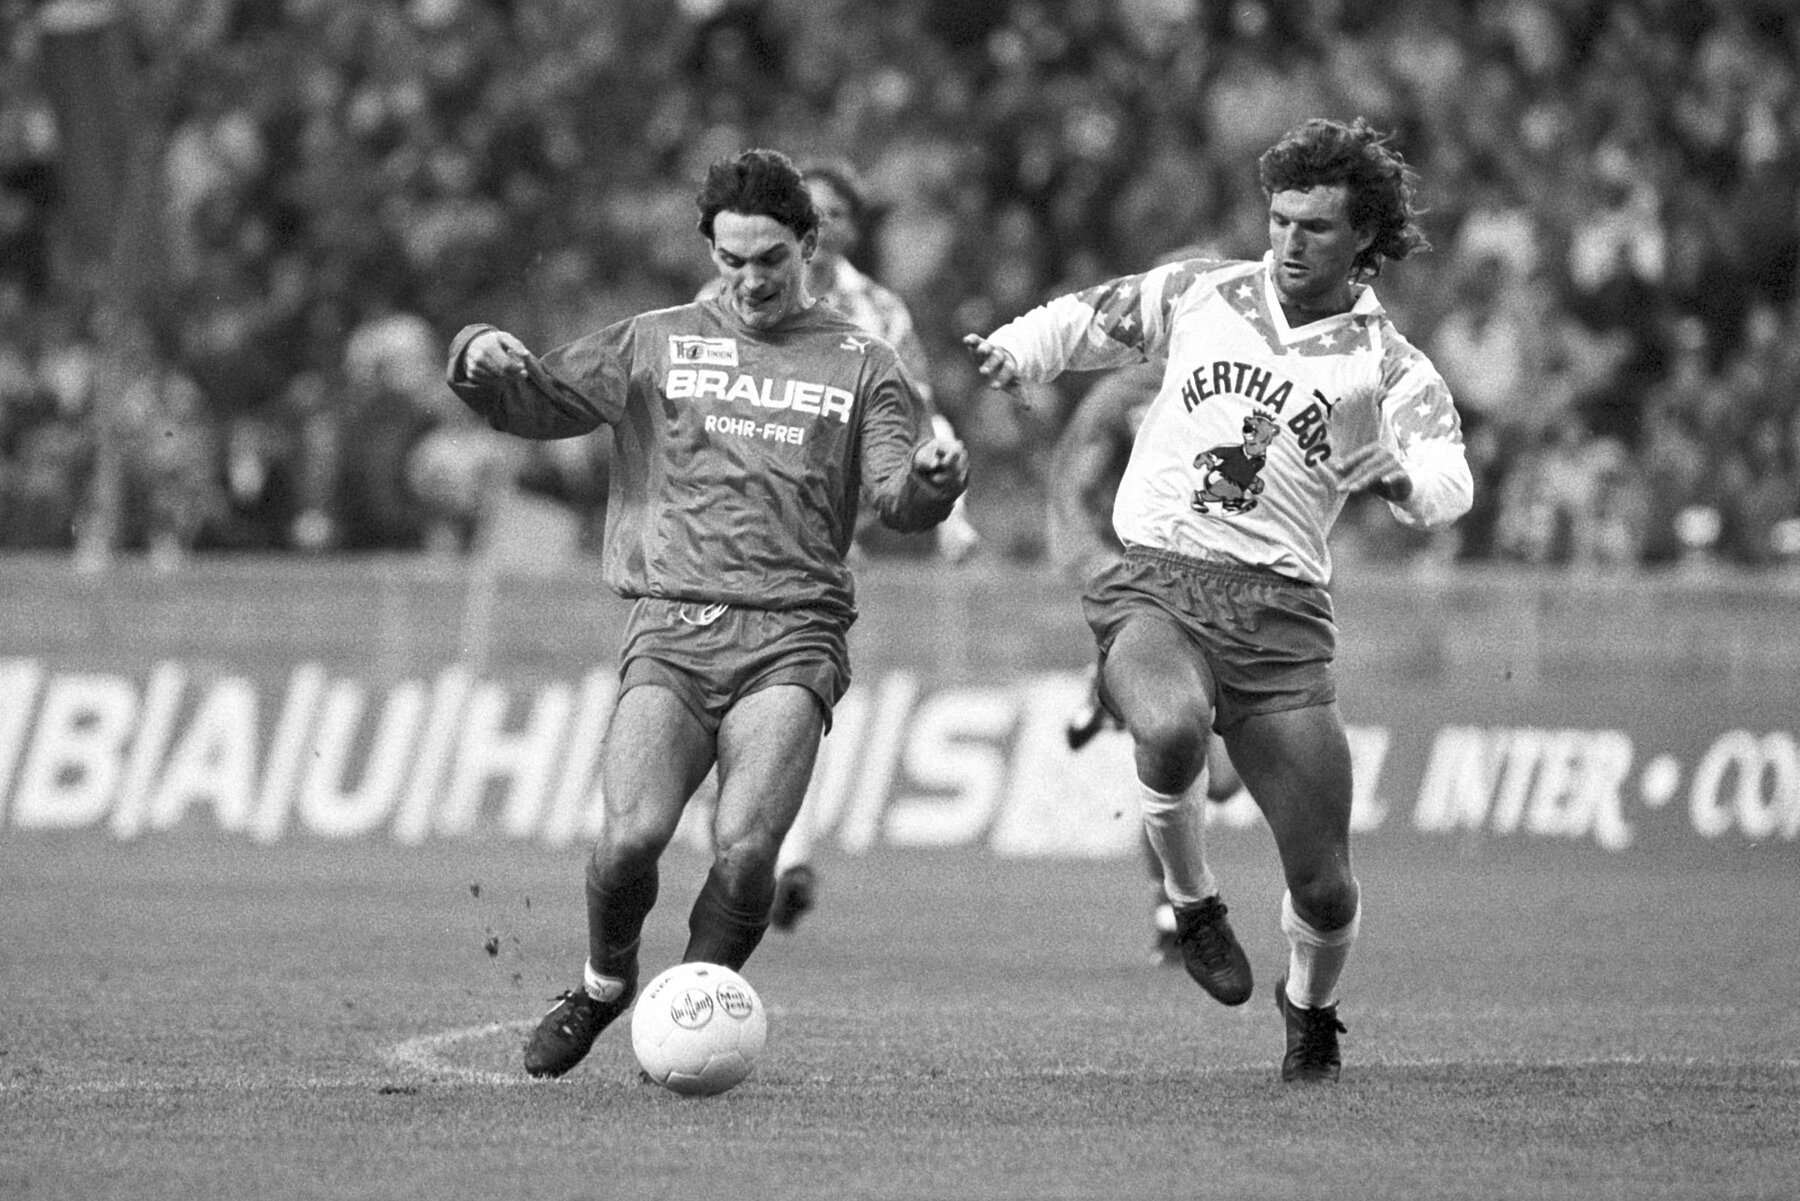 A Hertha player and a Union player in a duel for the ball.